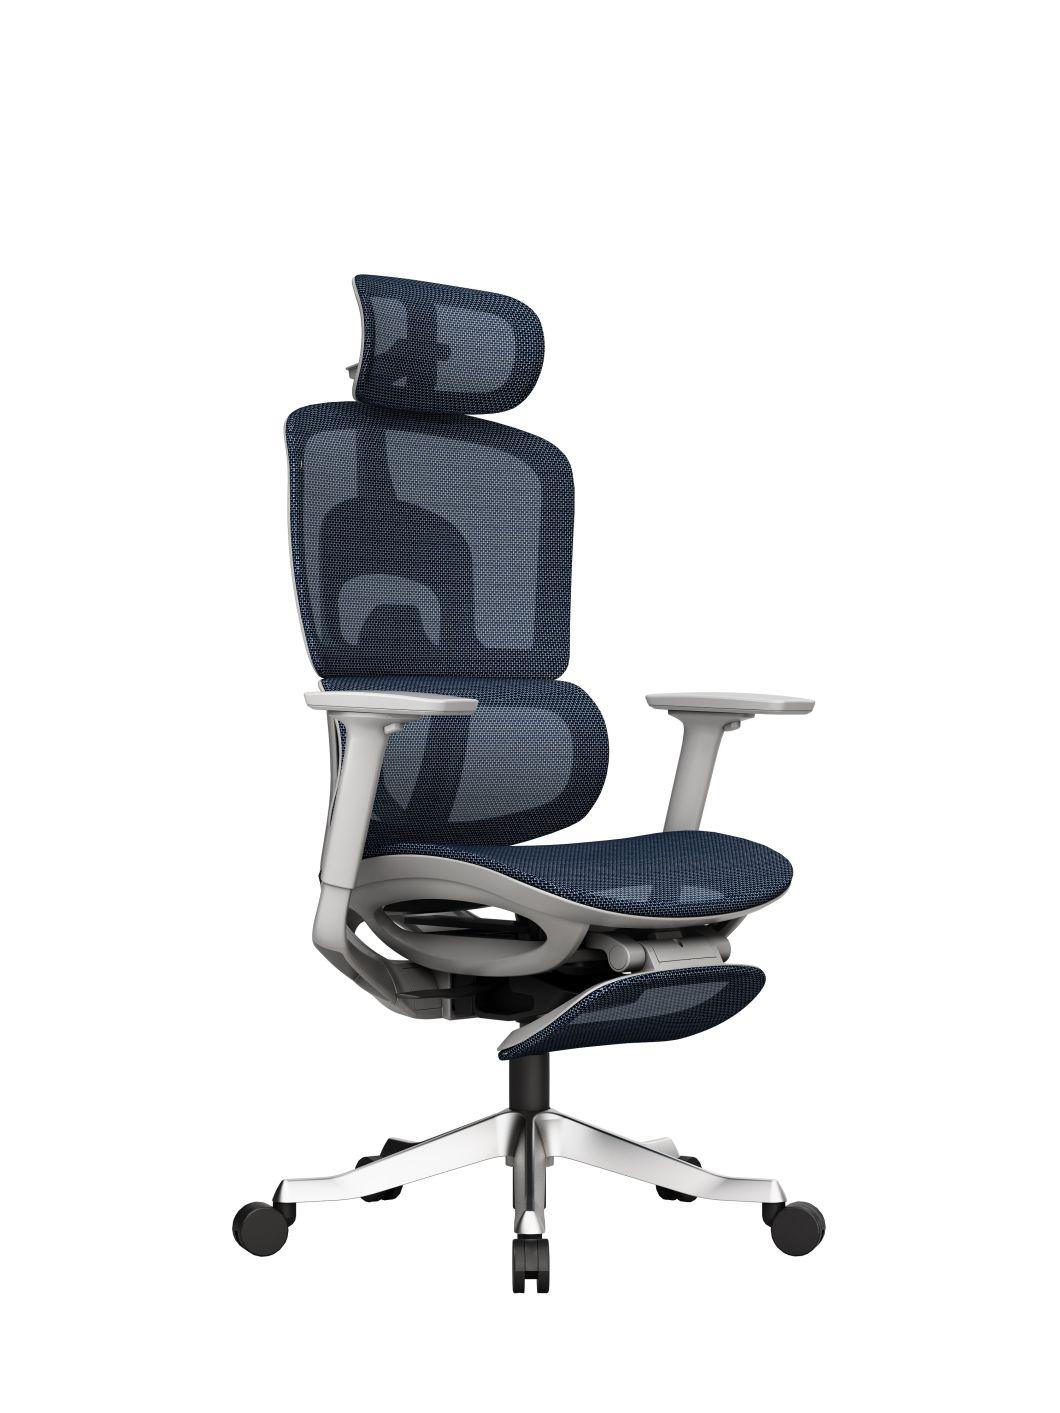 BIFMA Certificate Support Mesh Seat Office Chair with Advanced Design Ergonomic Office Chair